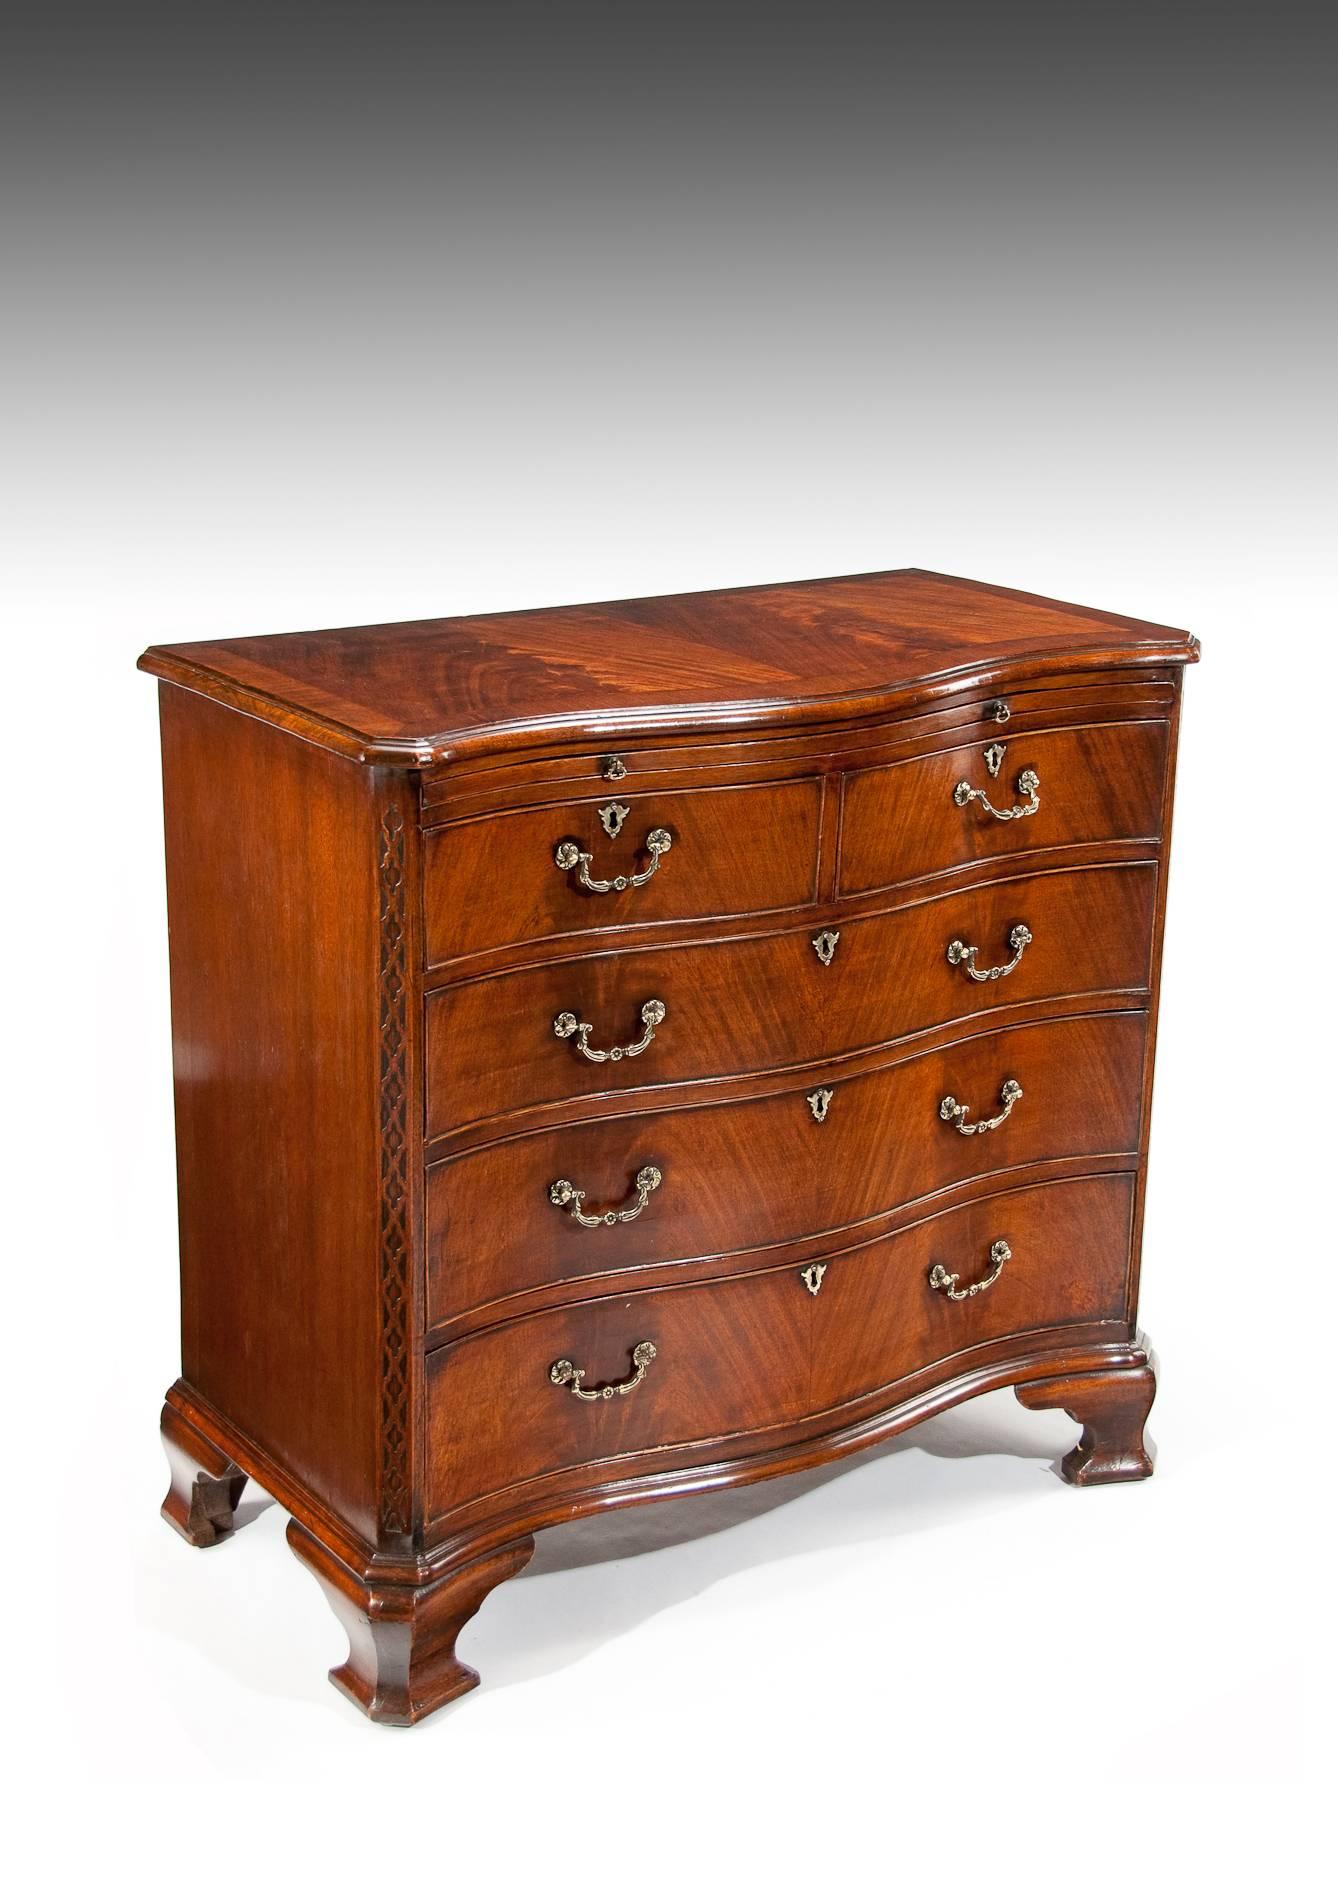 A handsome antique mahogany and oak lined serpentine chest of drawers dating to circa 1900.
Extremely well constructed this very good quality bachelors chest of drawers has a flame mahogany bookmatched veneered serpentine fronted top with a